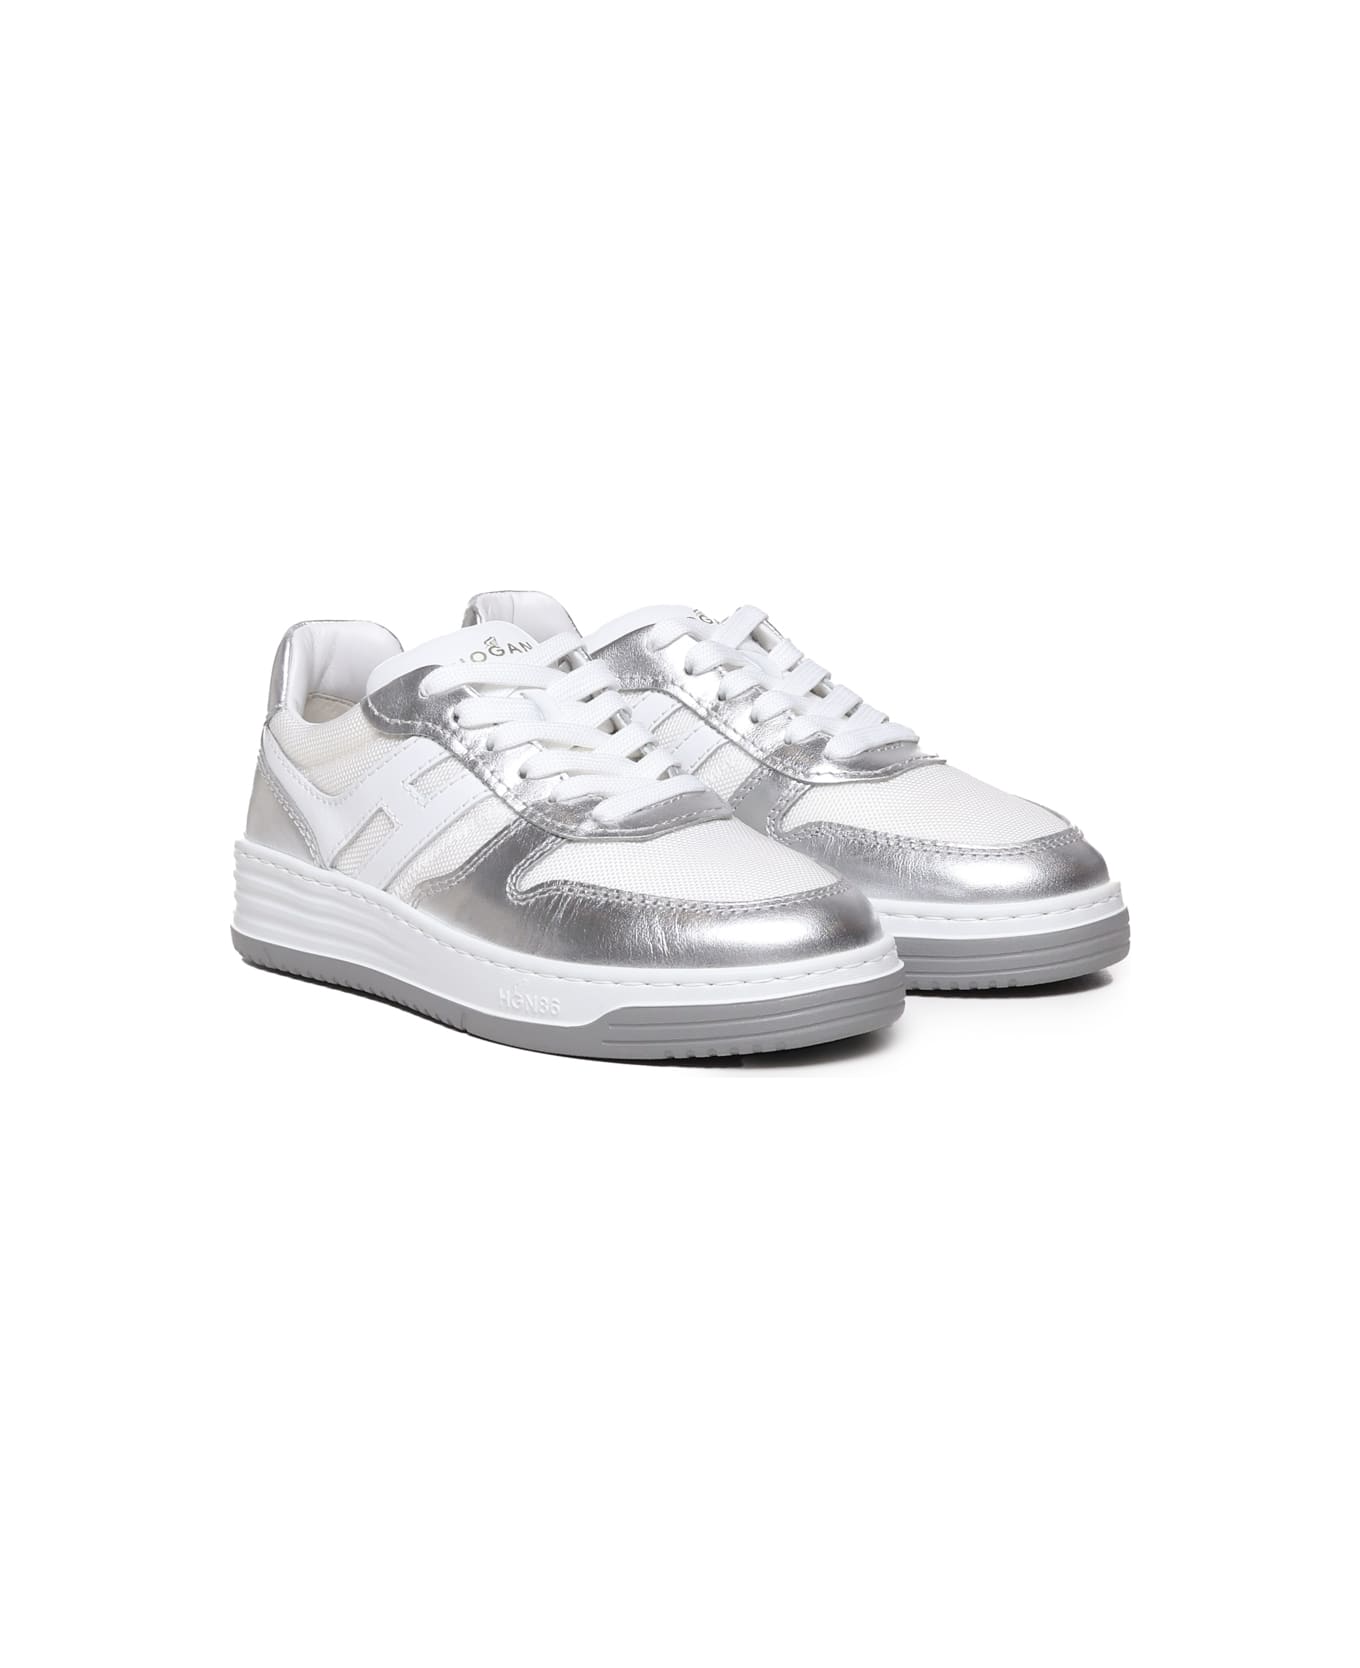 Hogan 630 Sneakers With Metallic Inserts - White, silver スニーカー